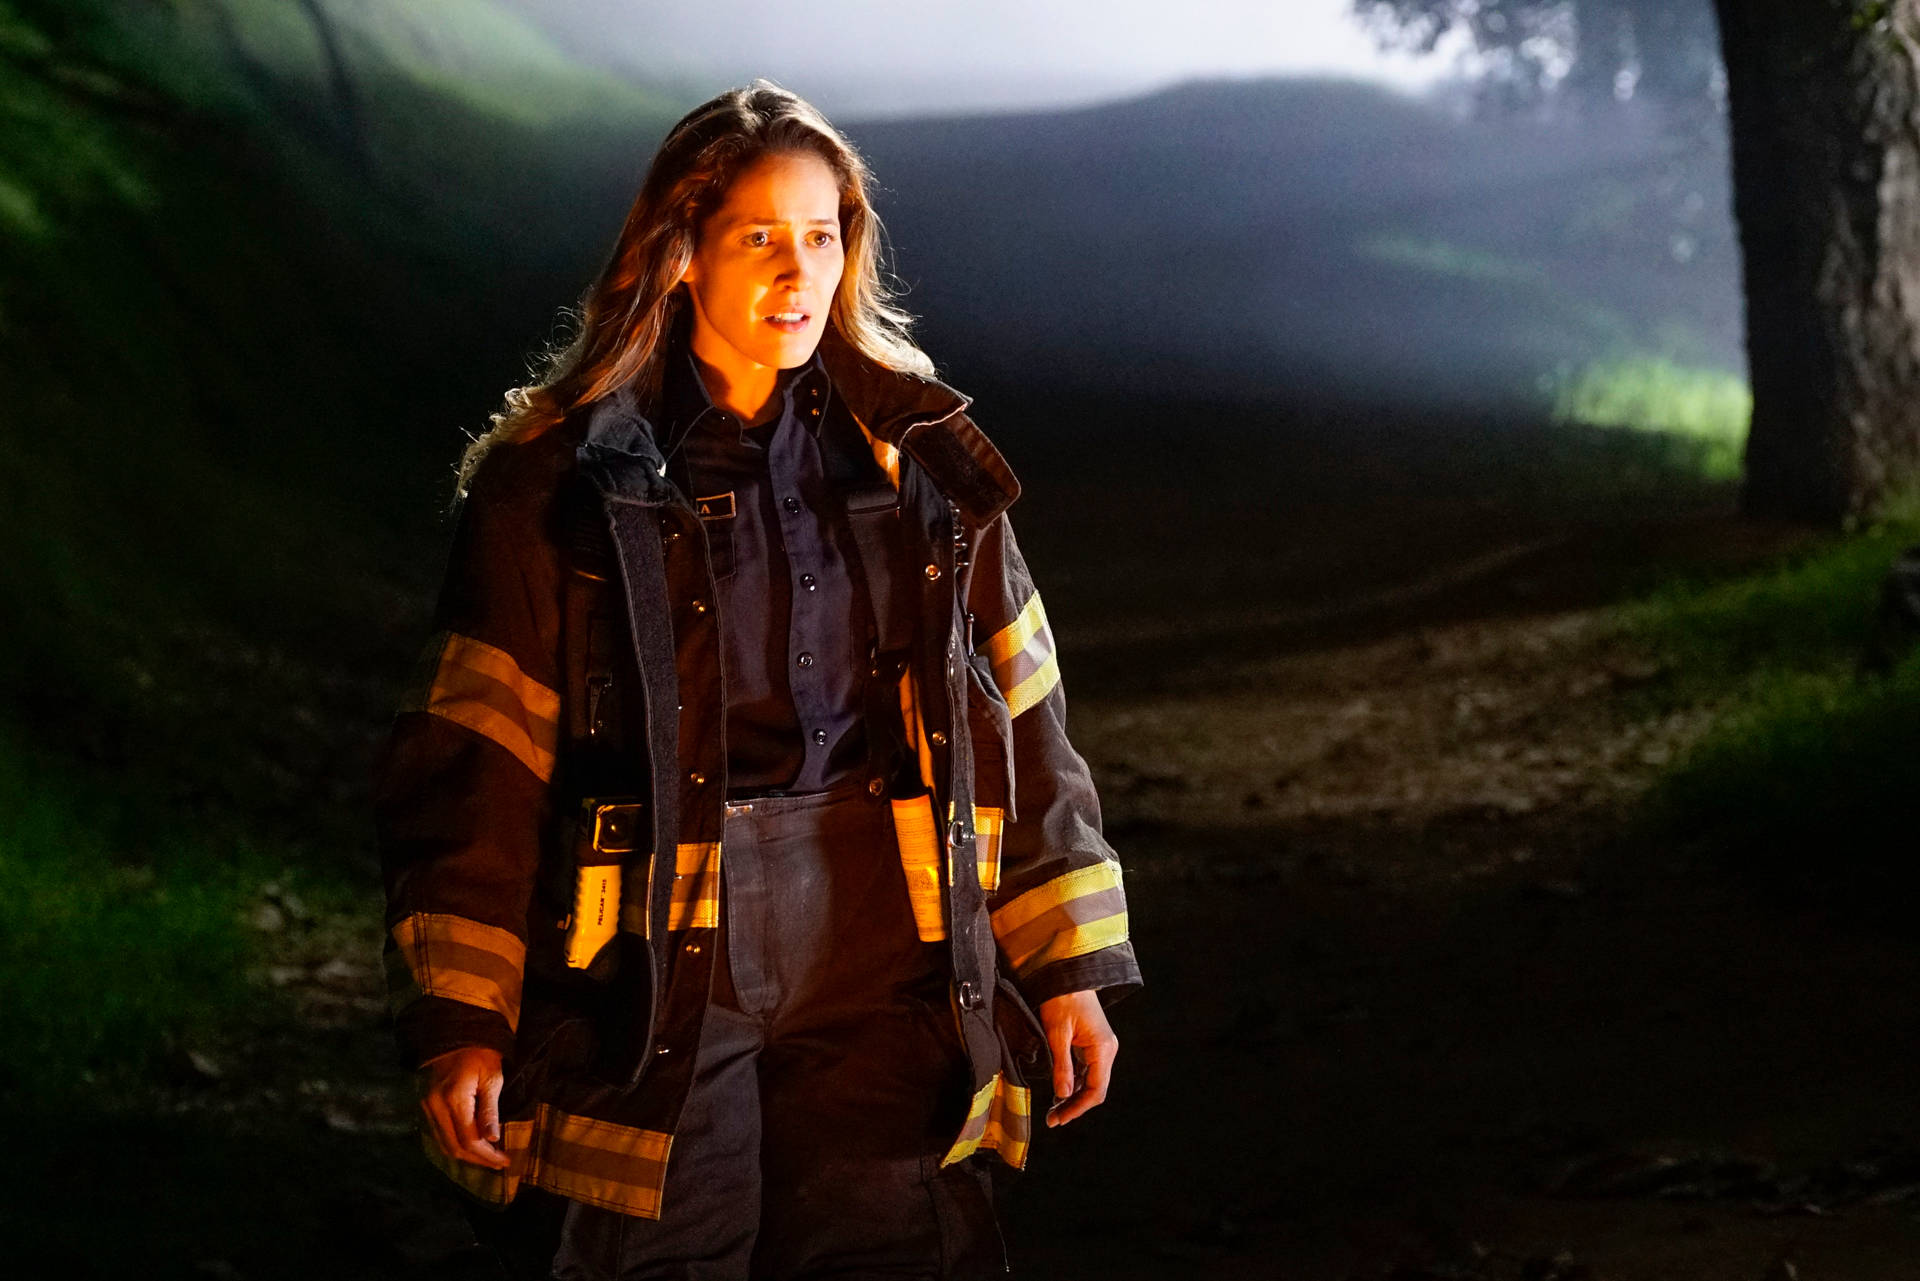 Caption: Courageous Firefighter from Station 19 Wallpaper